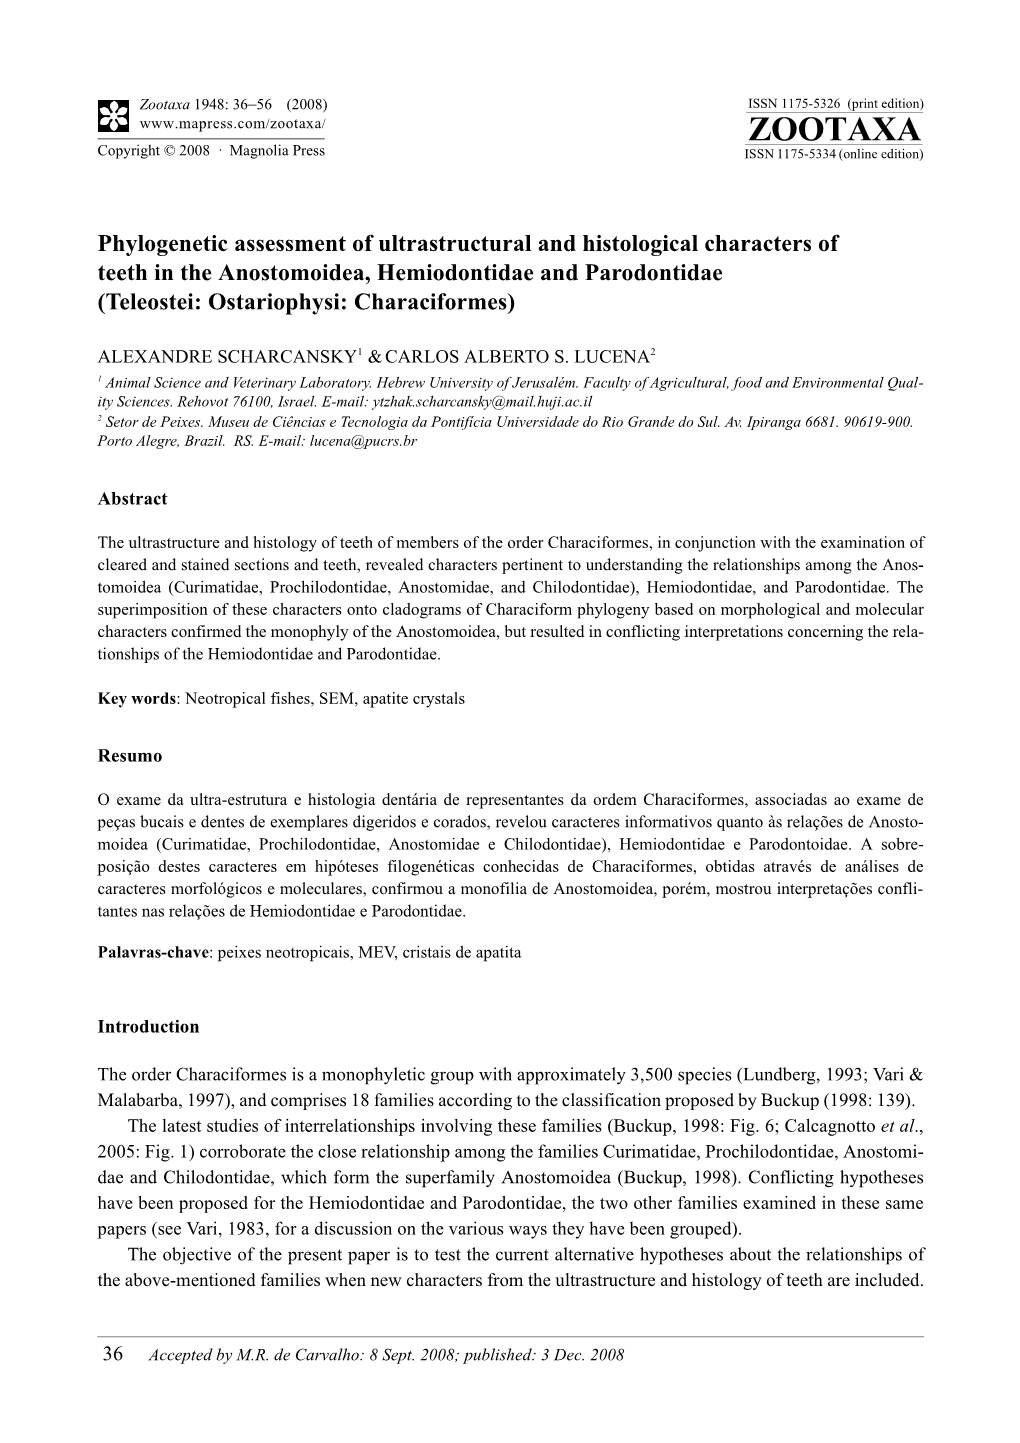 Zootaxa, Phylogenetic Assessment of Ultrastructural and Histological